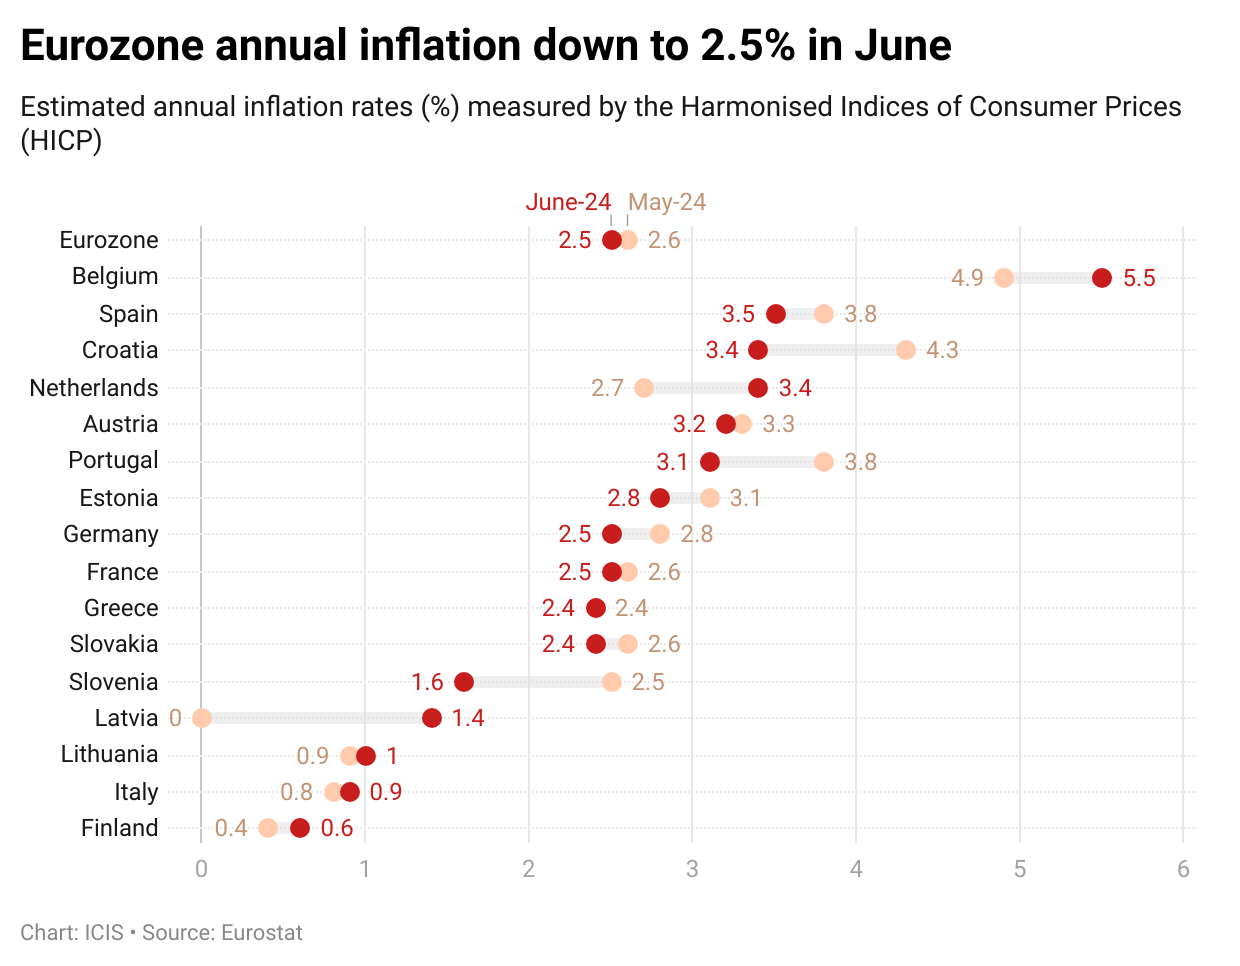 Eurozone inflation resumed downward trend in June following
      ECB interest rate cut